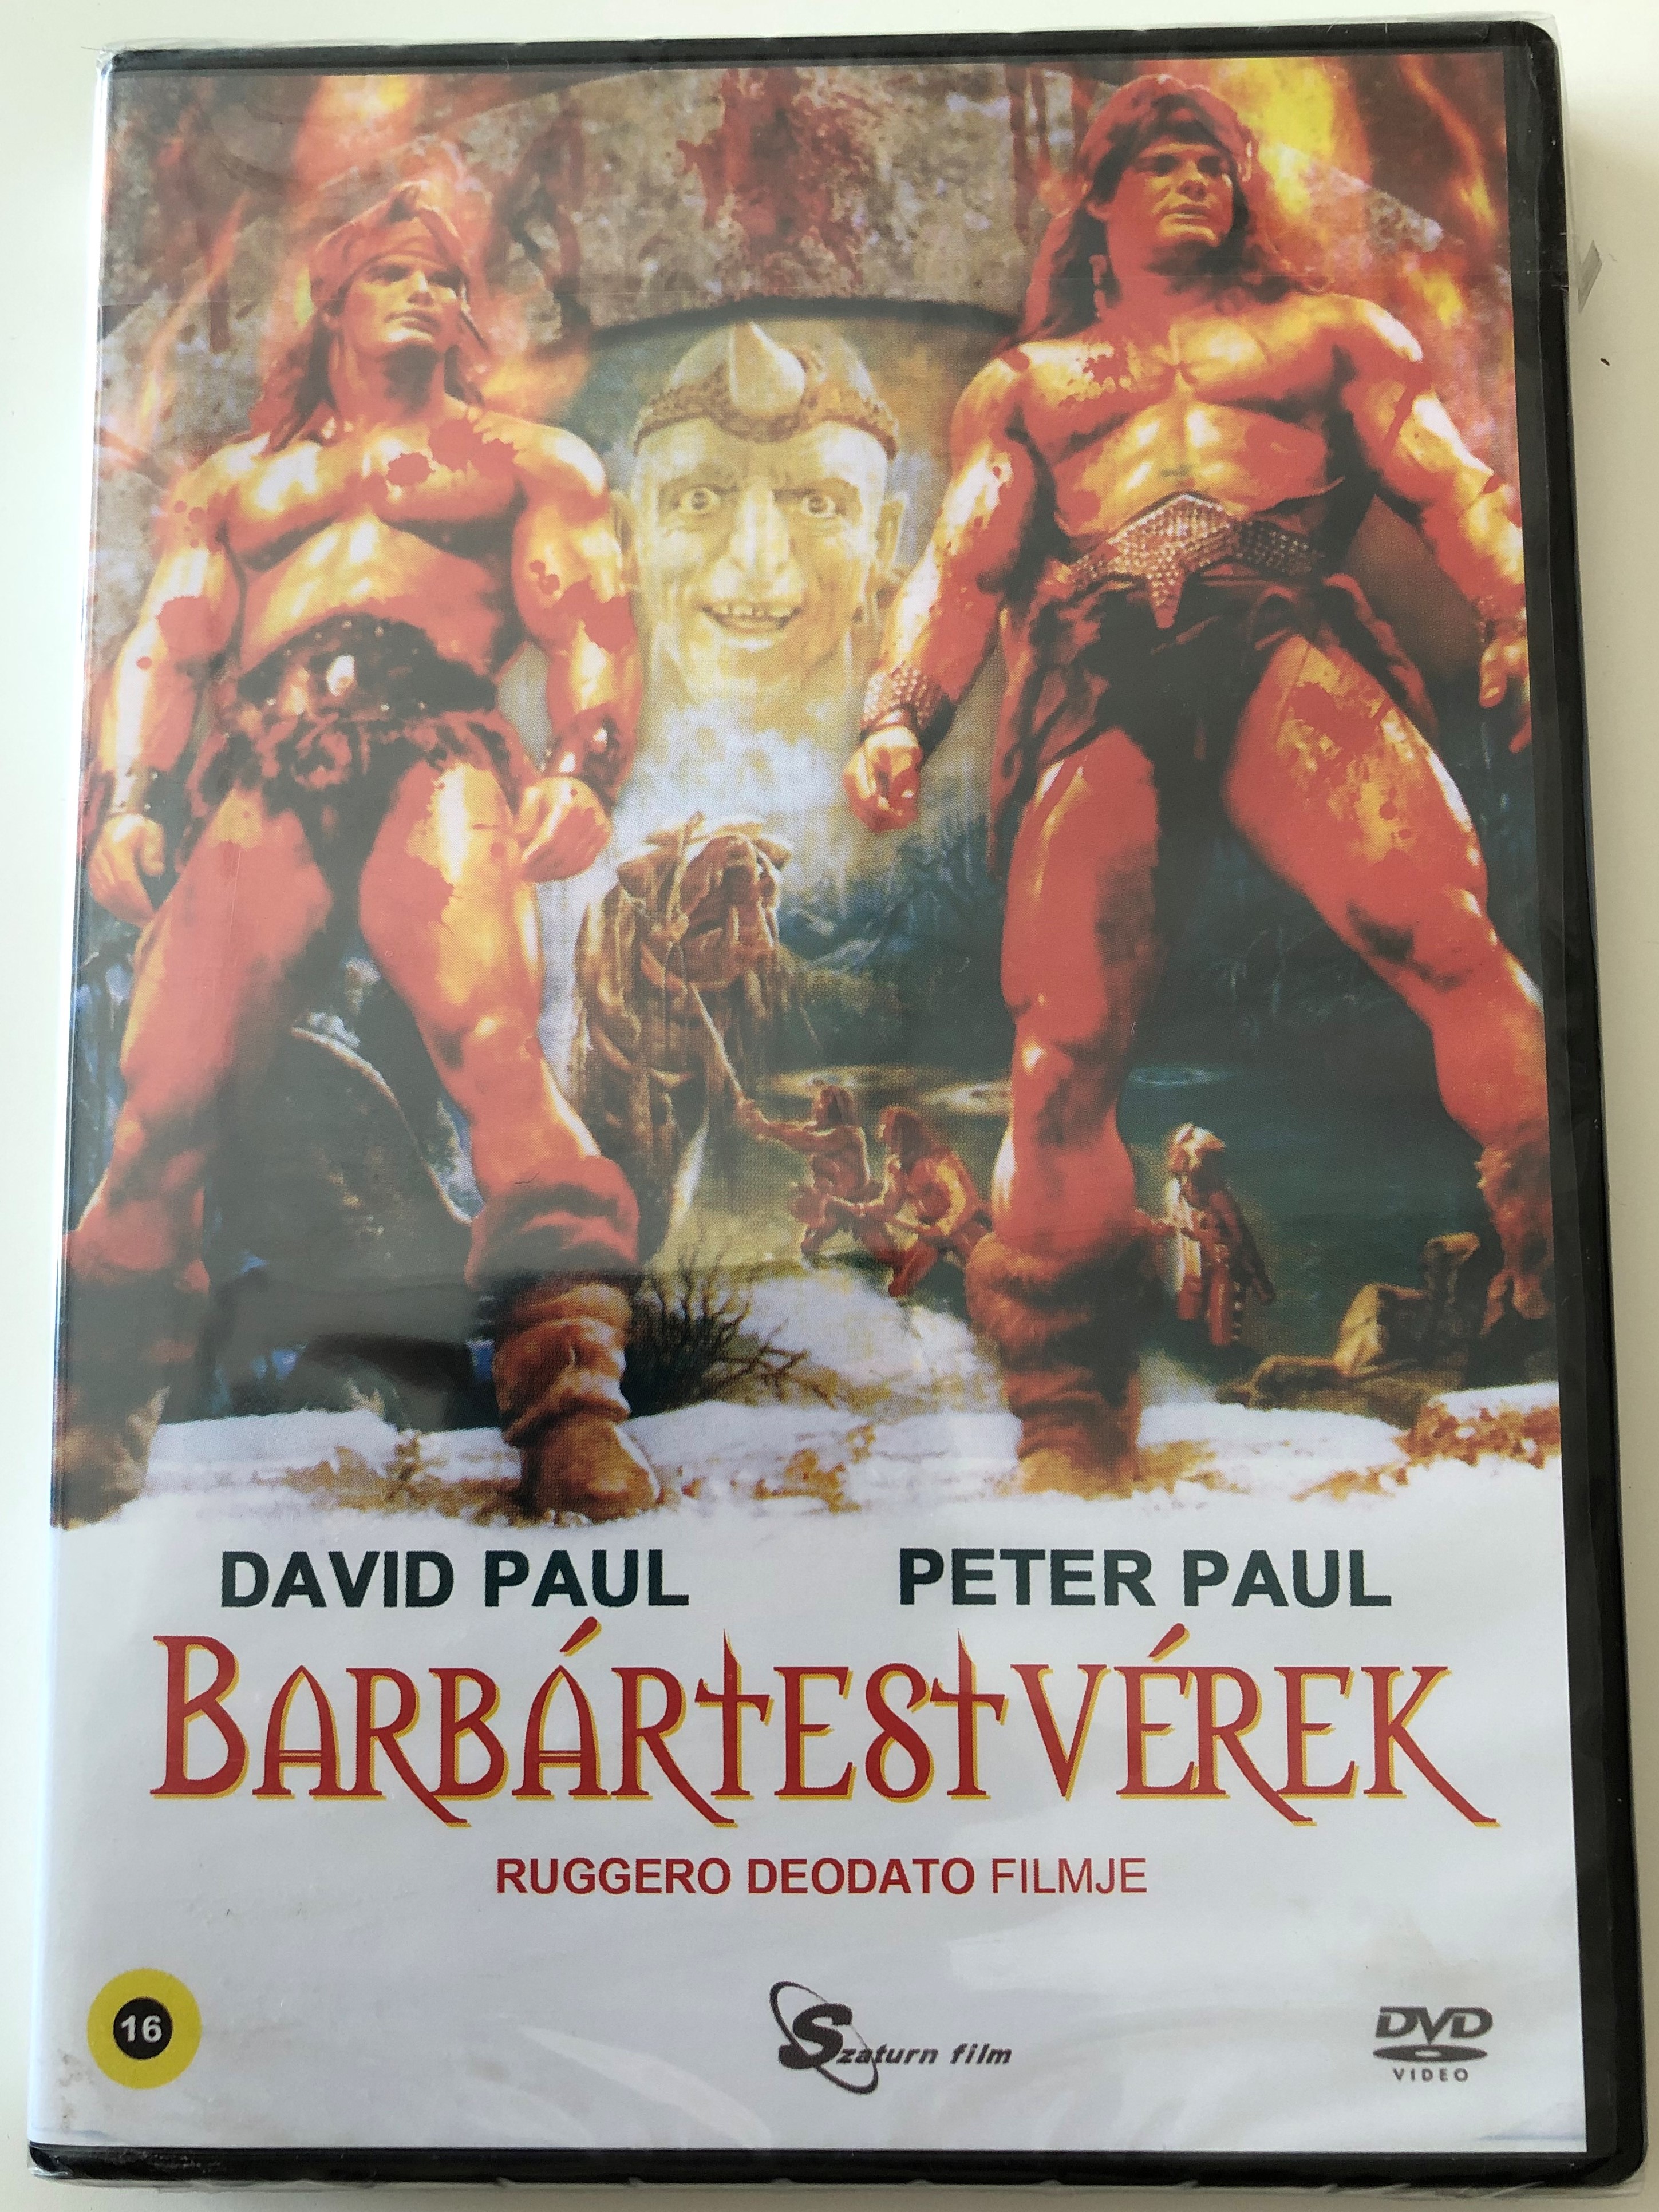 The Barbarians DVD 1987 Barbártestvérek / Directed by Ruggero Deodato /  Starring: Peter Paul, David Paul - Bible in My Language